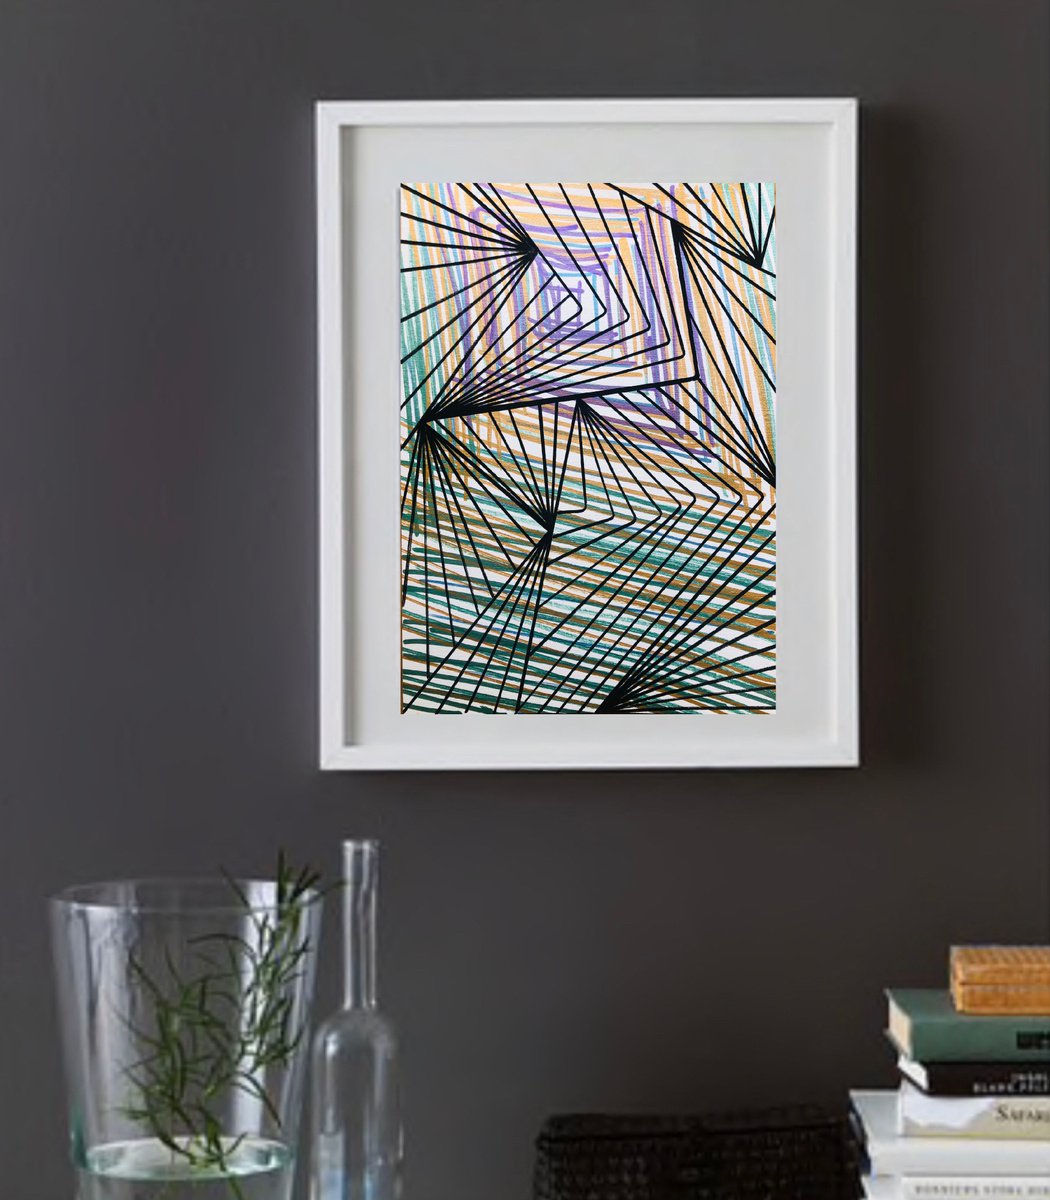 Debut 47 - Abstract Optical Art - Black and Metallic by Elena Renaudiere